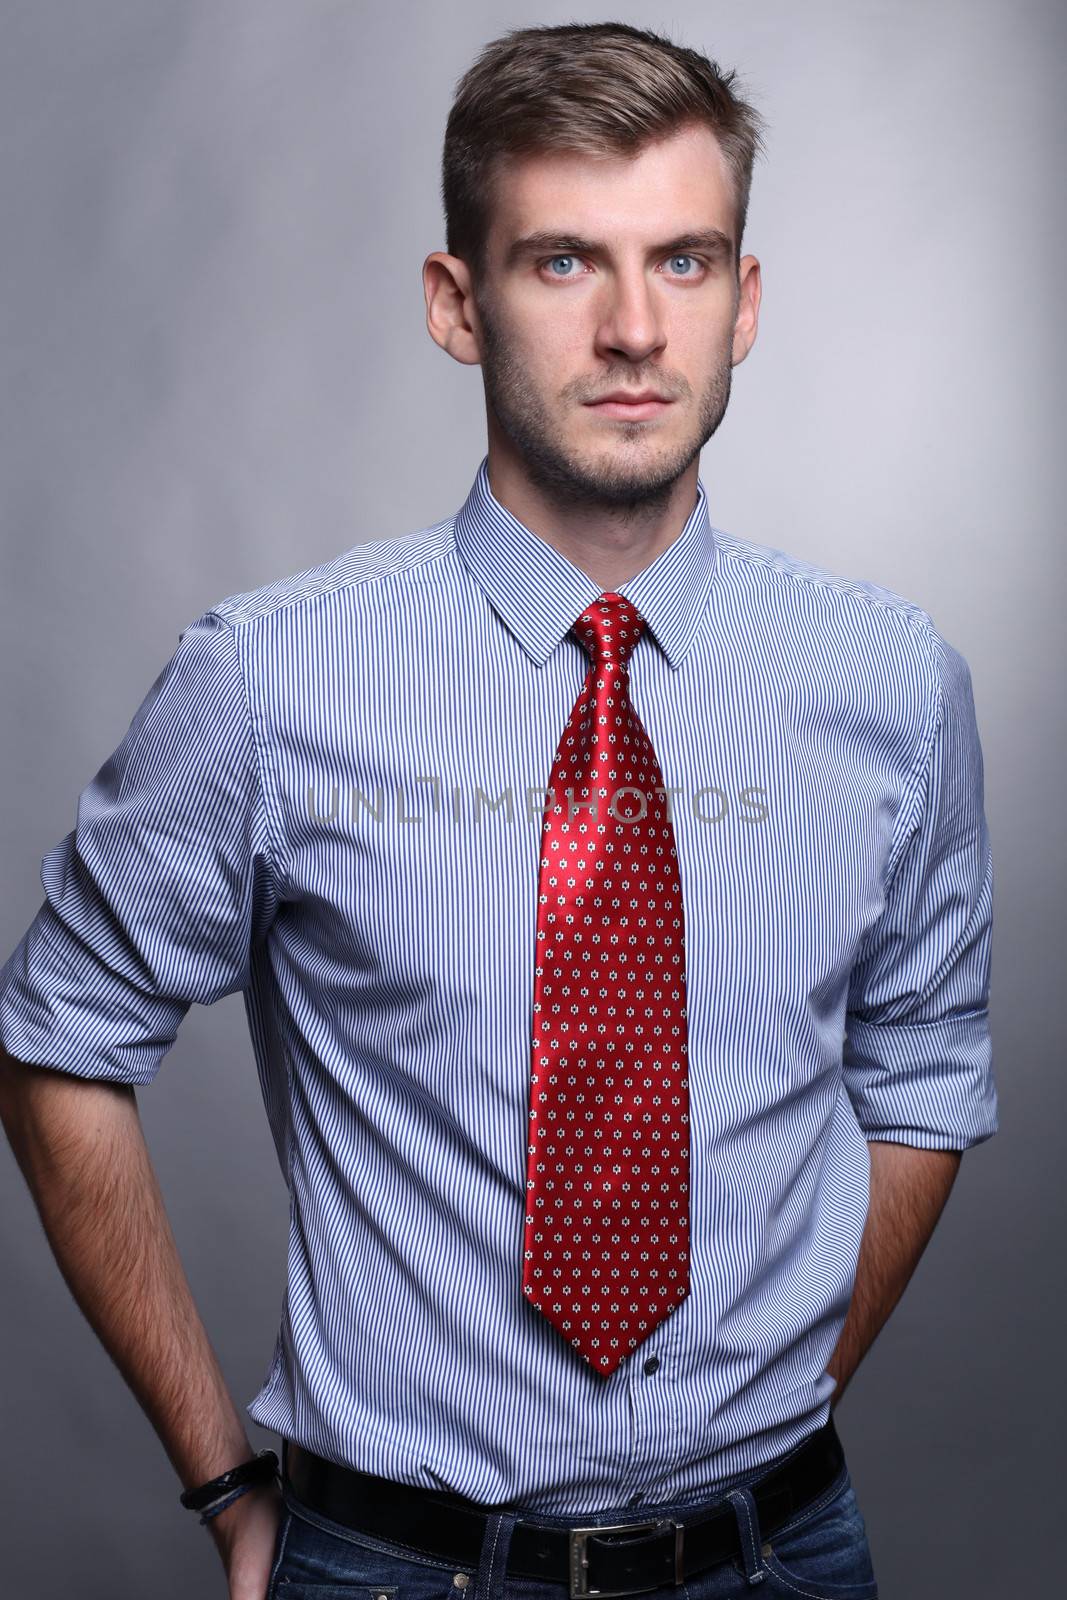 Portrait of young business man